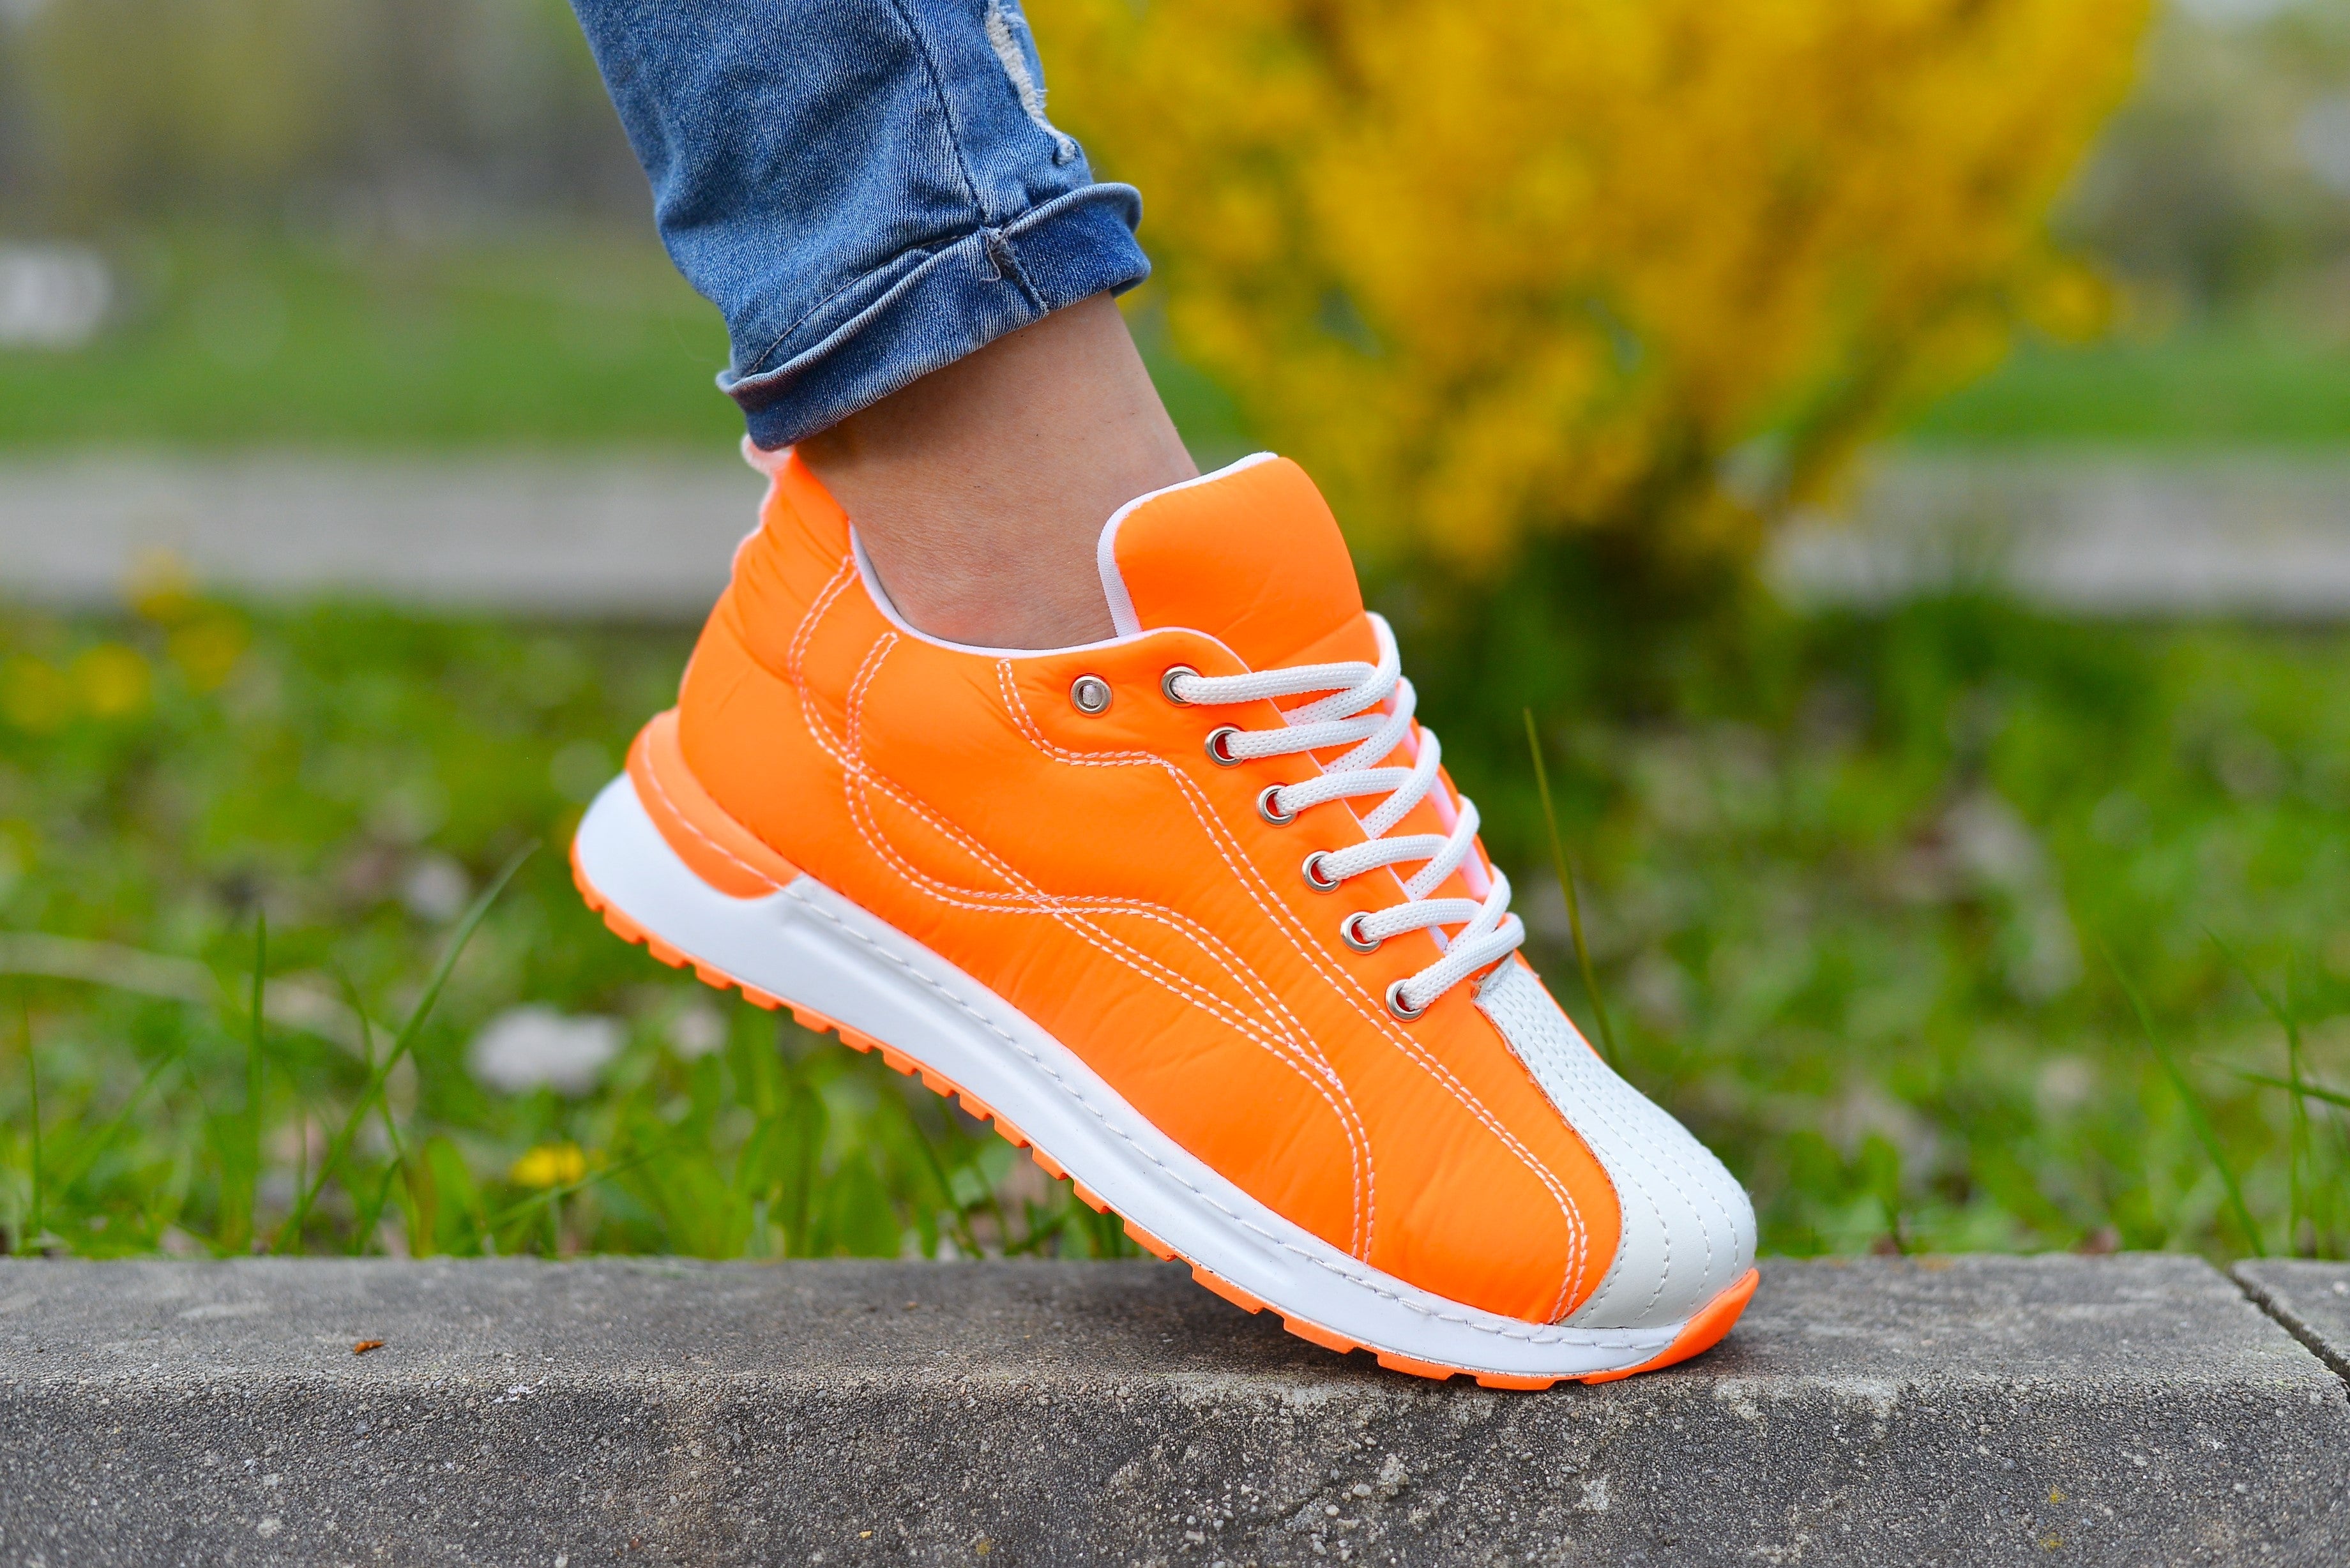 Women's Orange Neon Kate Sneakers Shoes Made of Textile Material